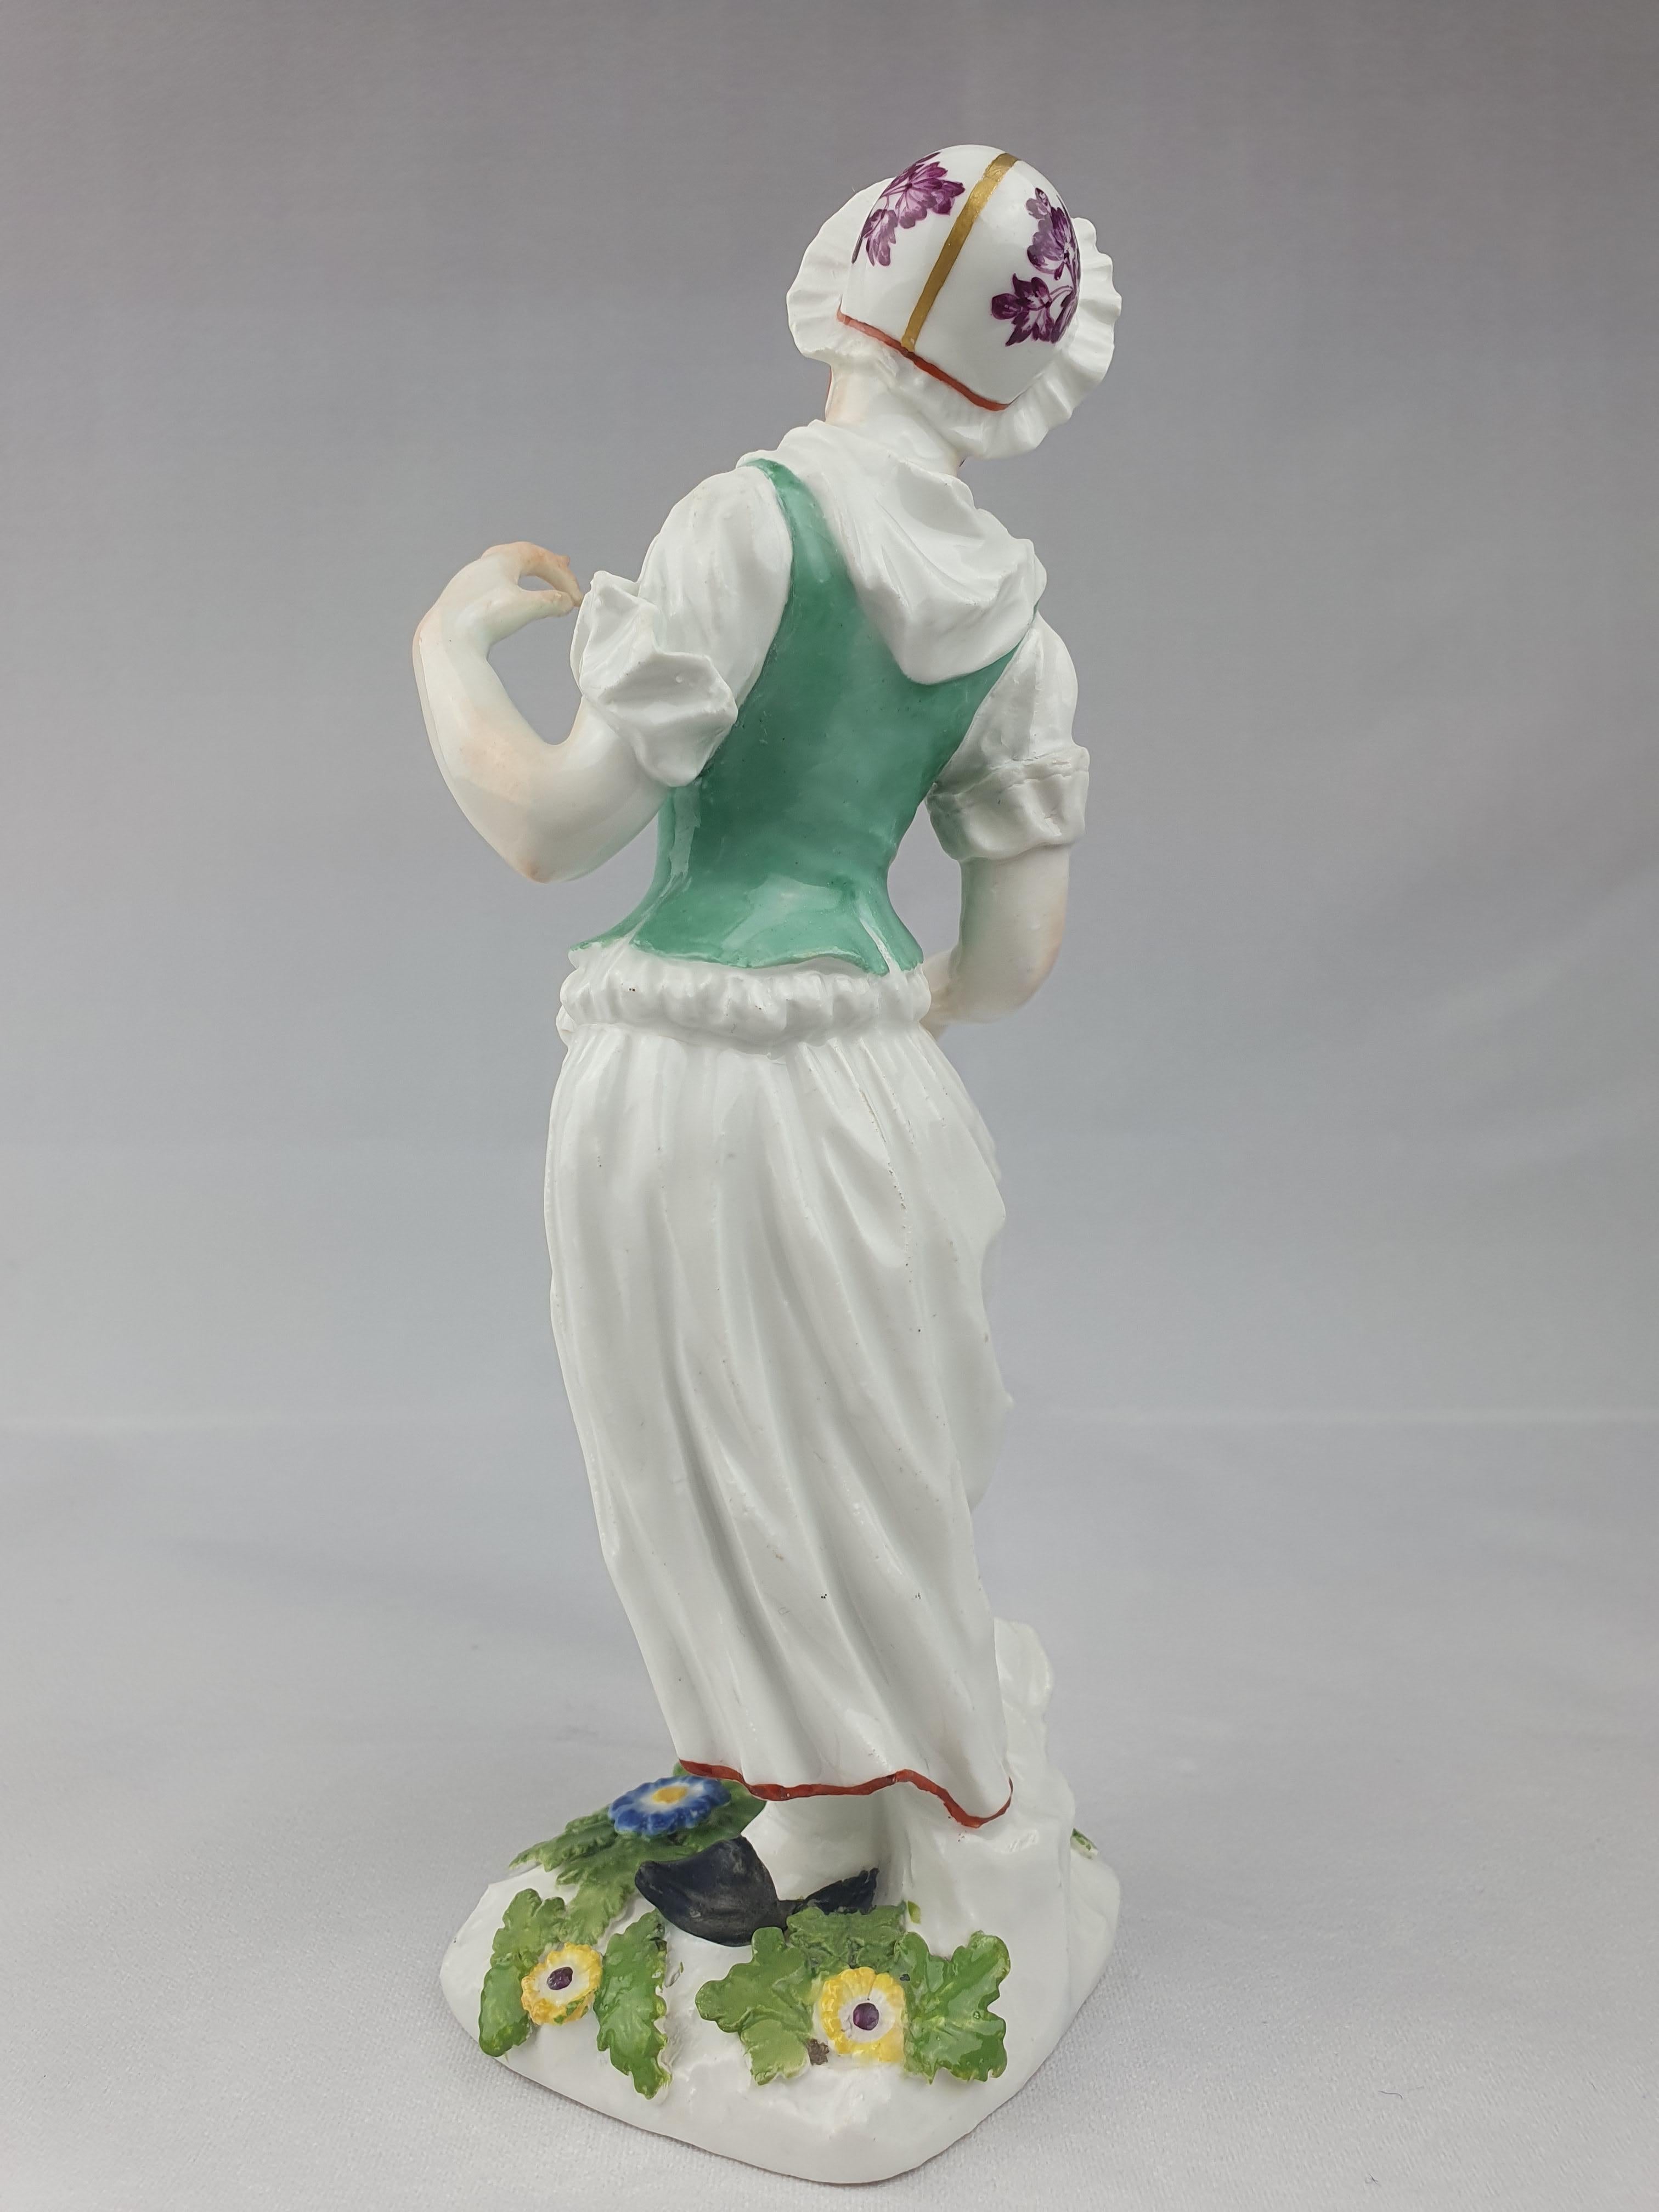 A very rare Meissen porcelain figure of a dancing peasant woman. Modelled in 1748-63 by Johann Joachim Kaendler and/or Peter Reinicke.

Unglazed underside, blue crossed swords mark to the reverse of the base.

Height is 19cm.

Circa 1748-1763.